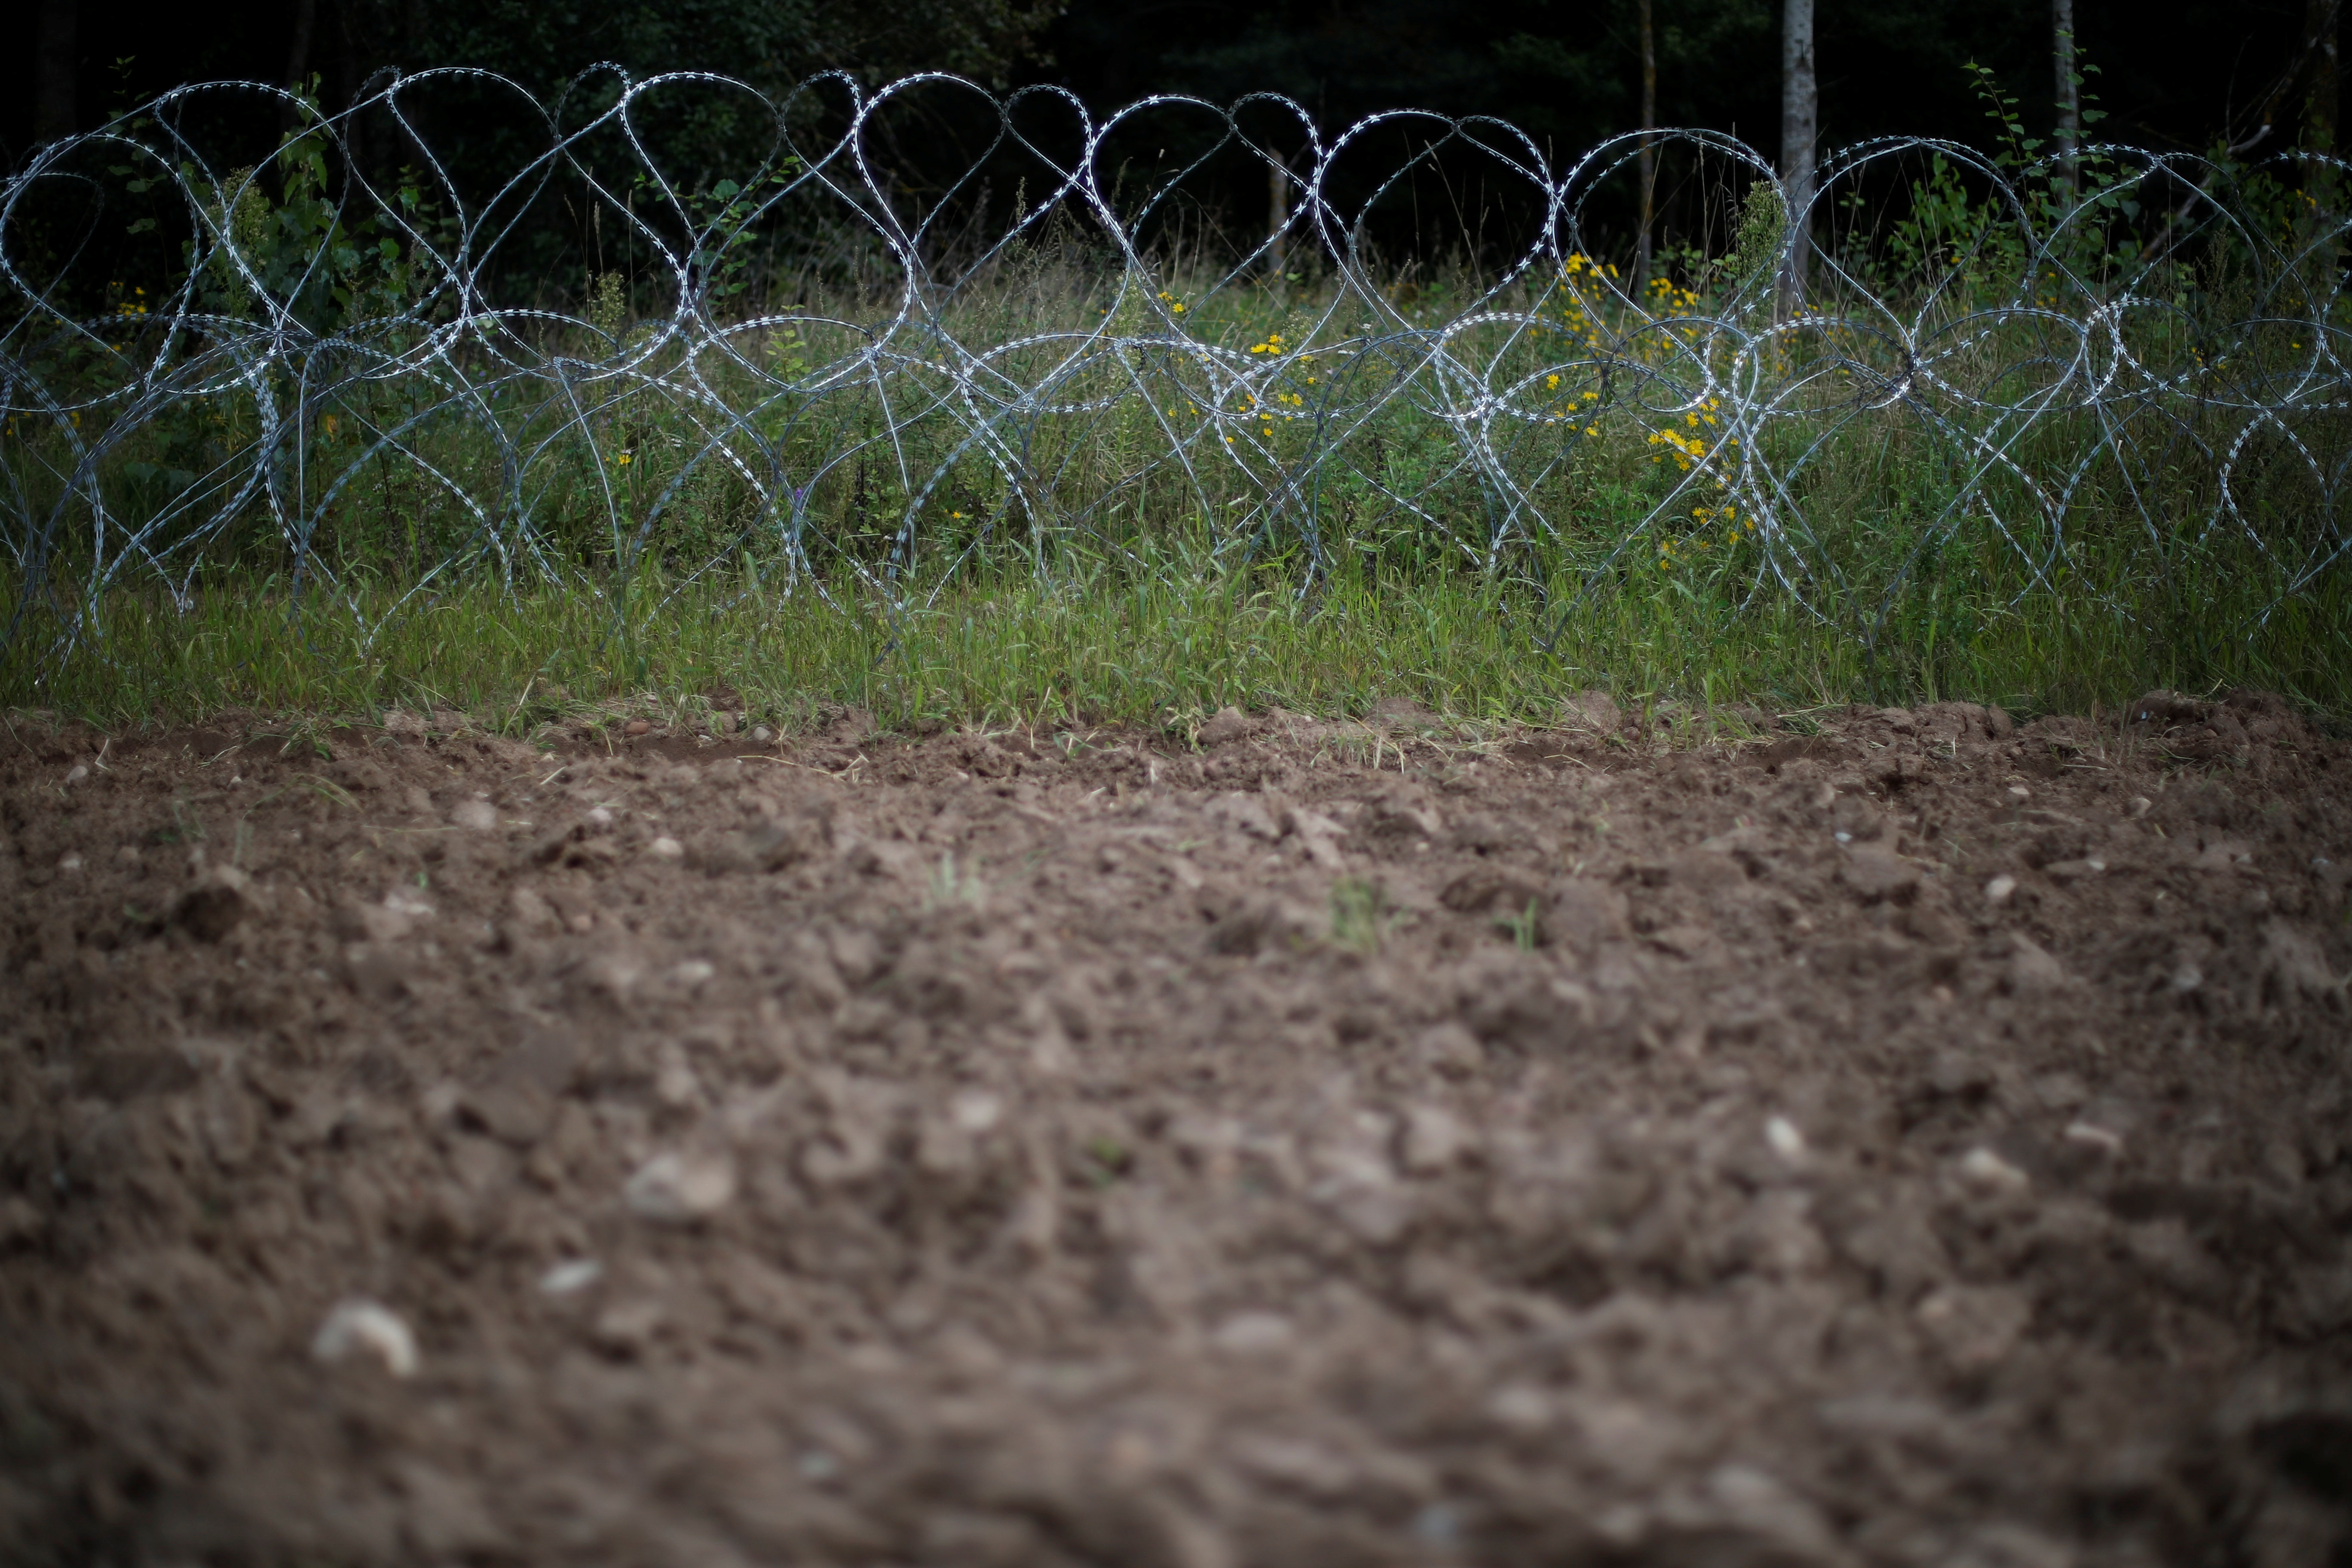 Barbered wire is pictured at the Polish-Belarusian border near the village of Usnarz Gorny